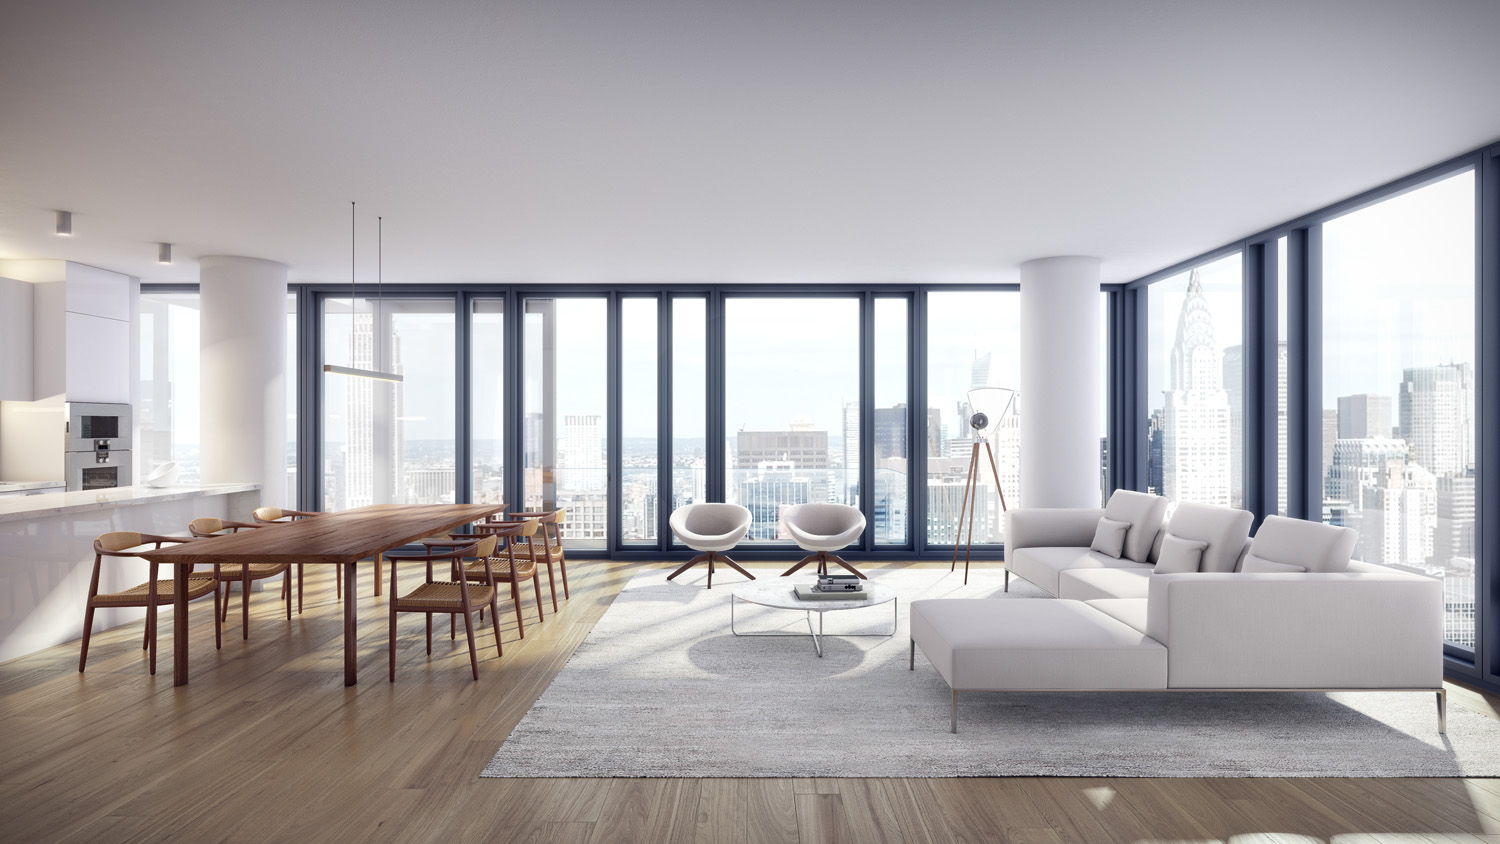 685 First Avenue, rendering by bloomimages